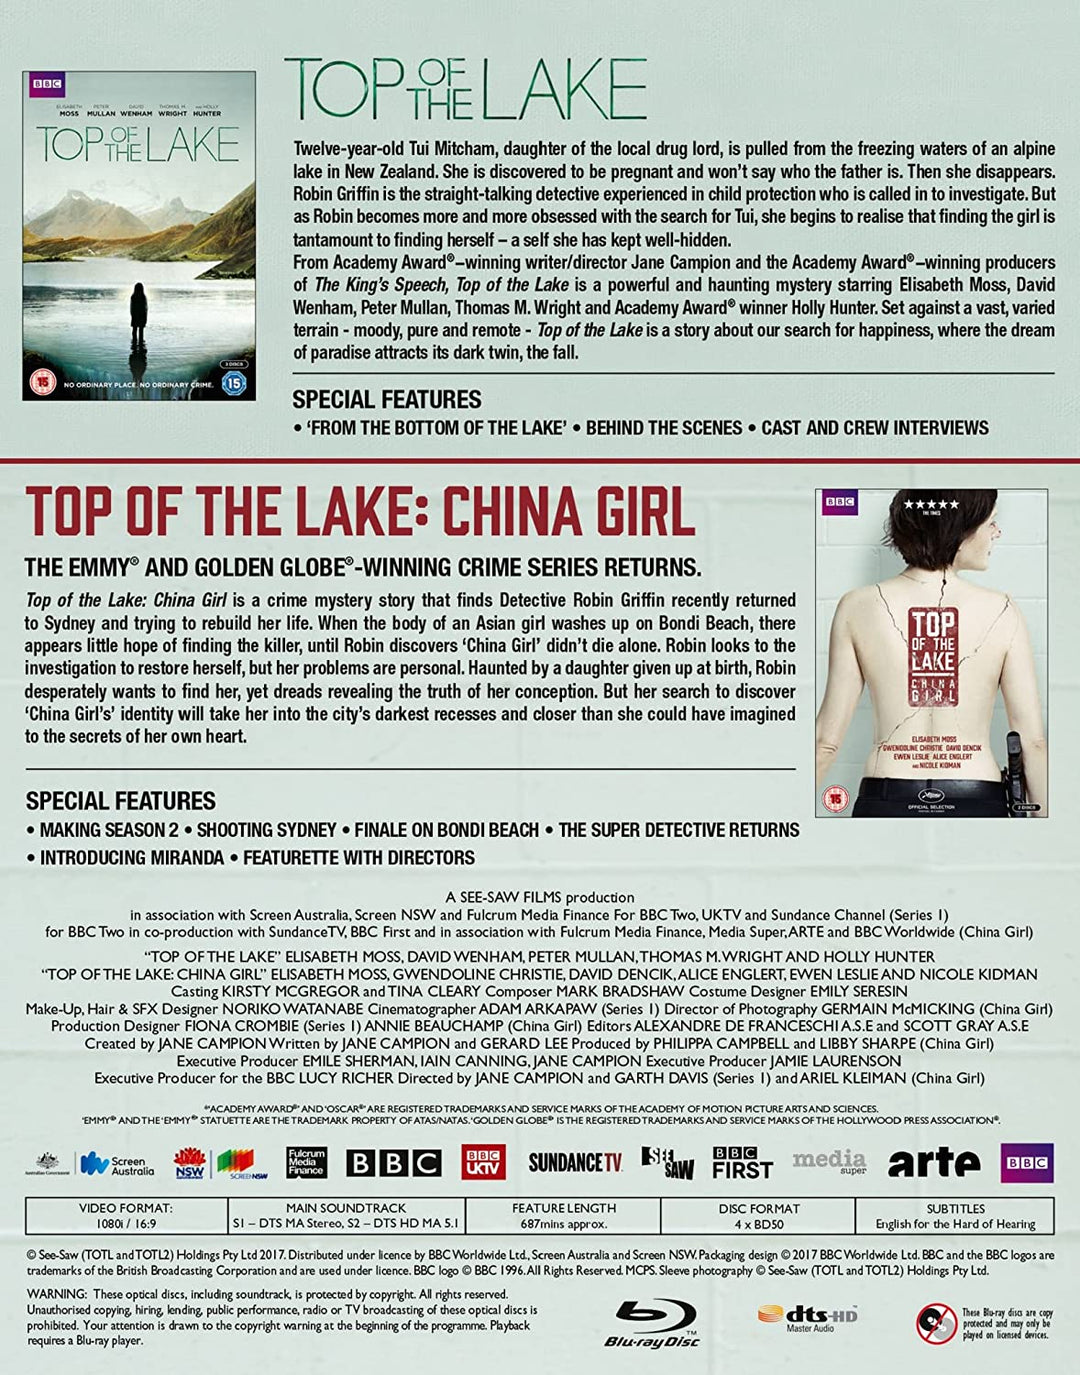 Top of the Lake: The Collection BD [2017] – Mystery [Blu-ray]